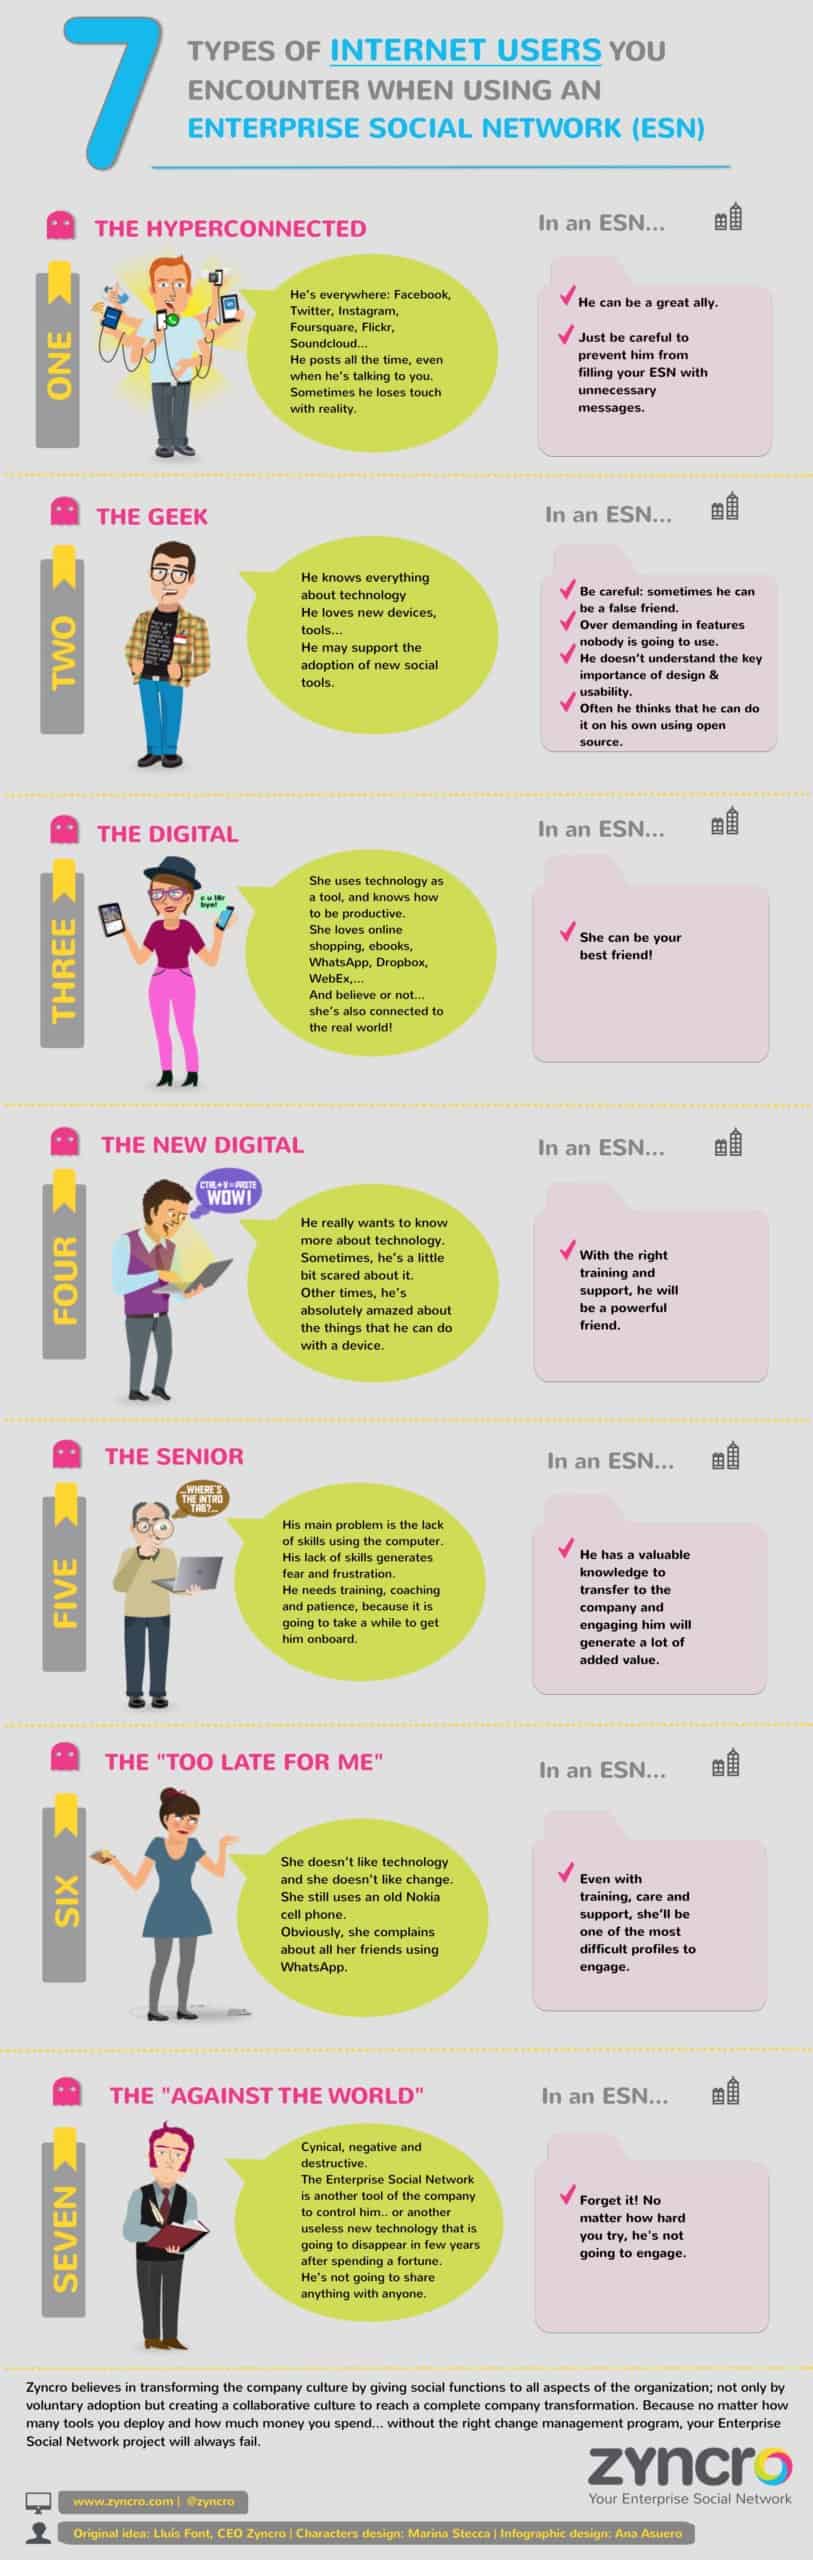 infographic-7-types-of-internet-user-you-encounter-when-using-an-esn-1